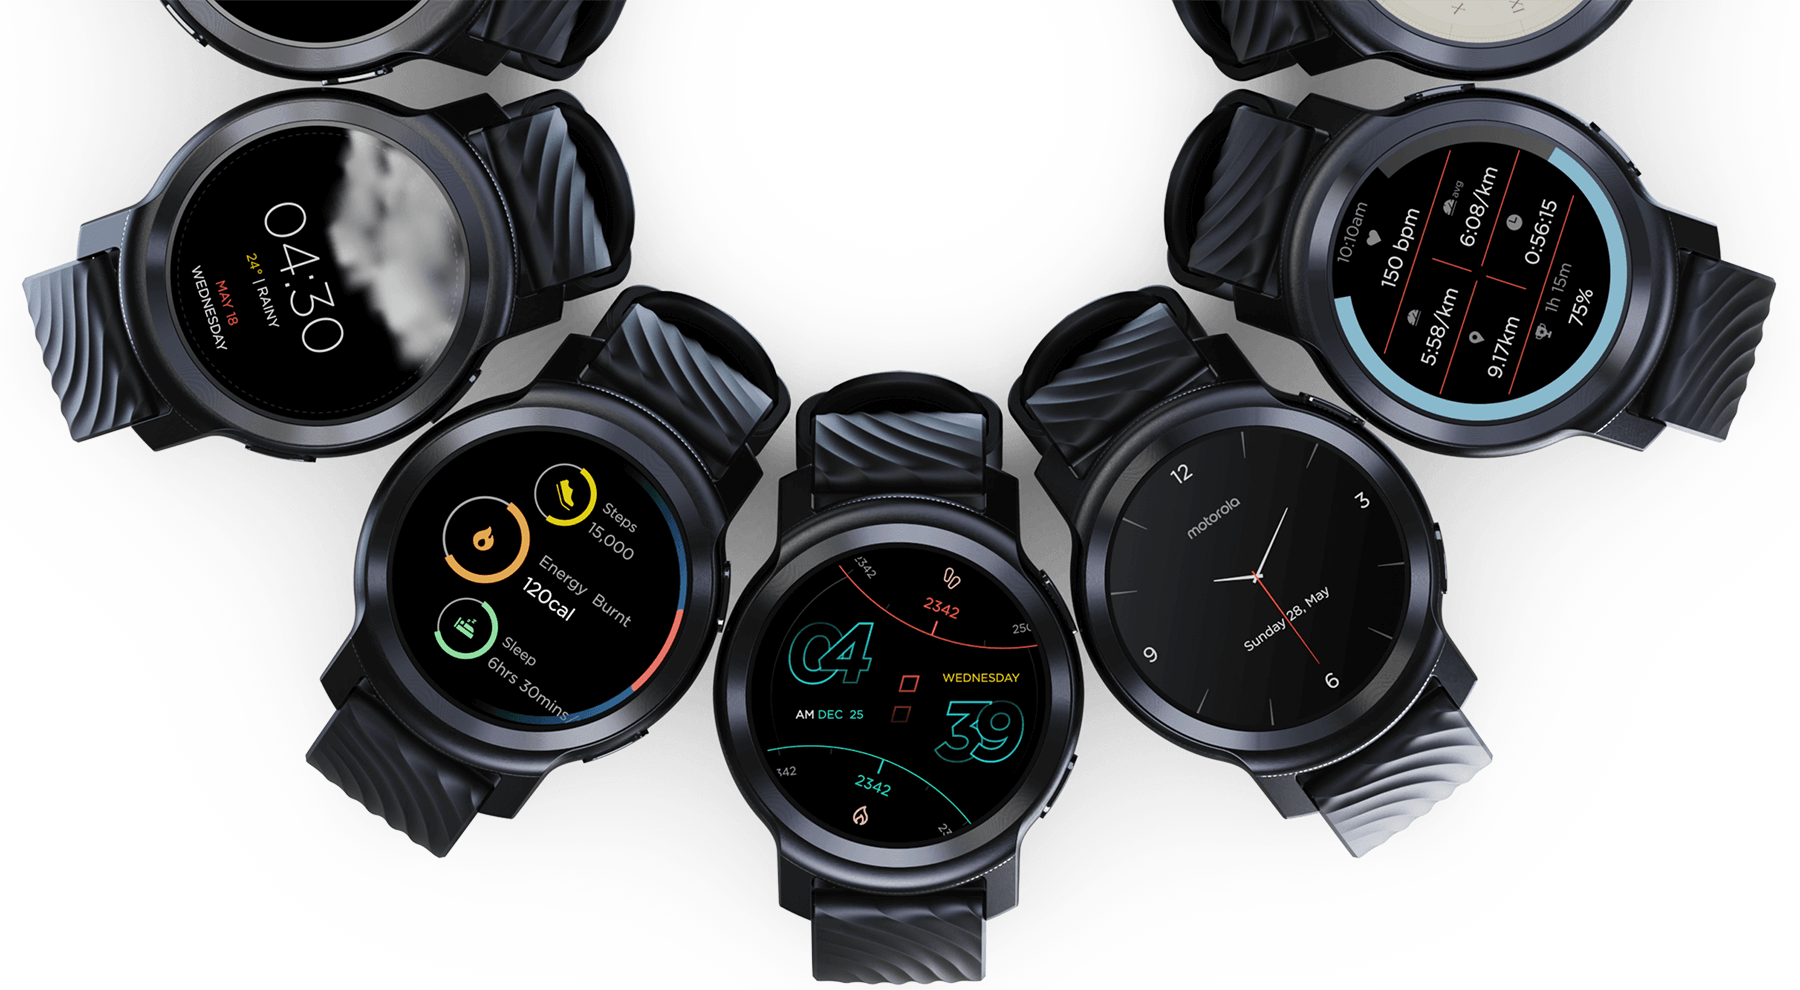 All new Moto Watch OS